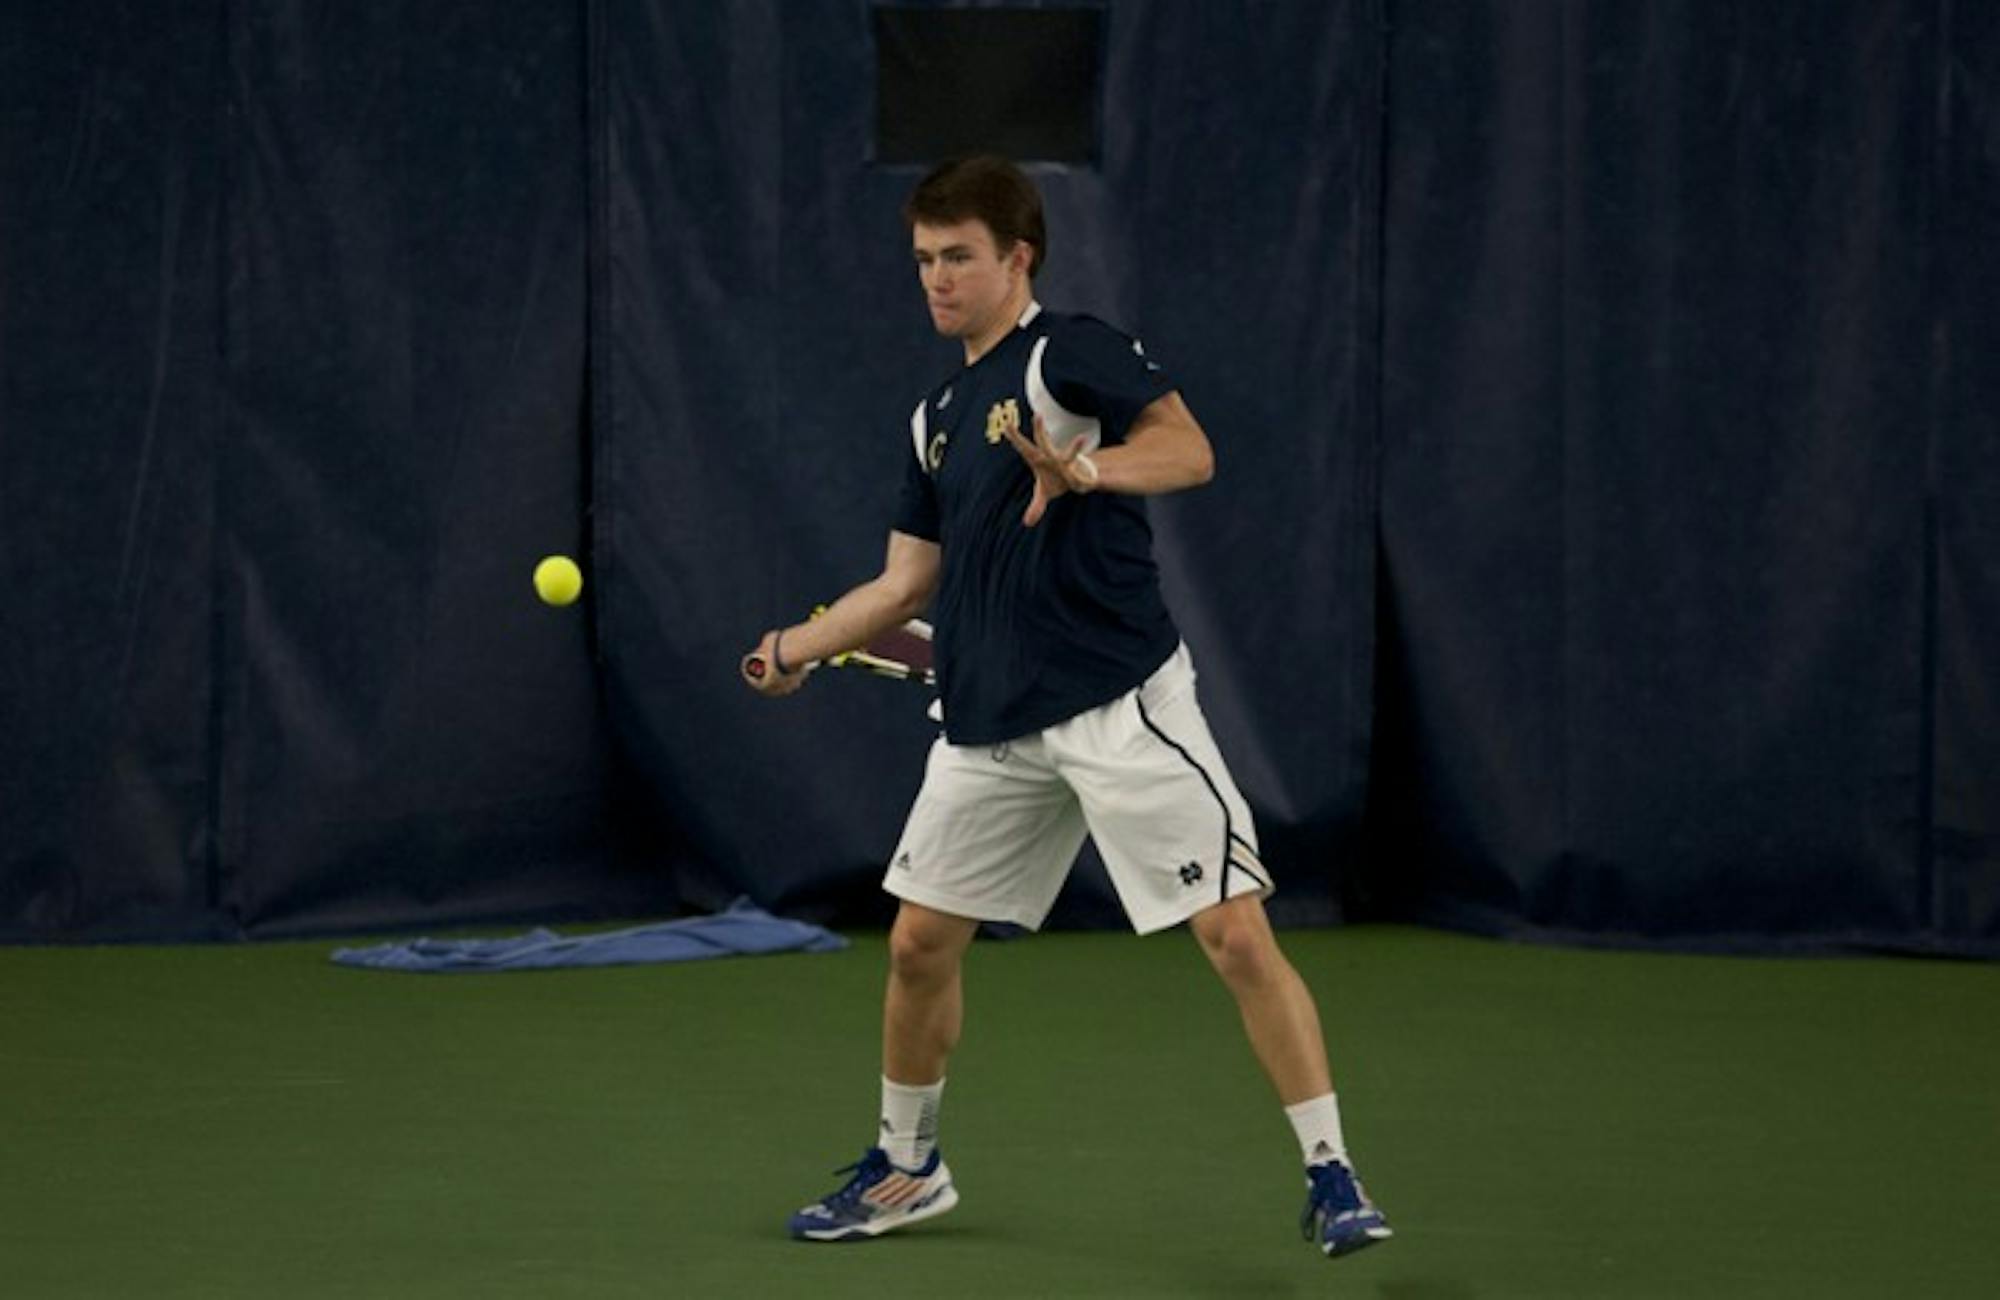 Irish senior Greg Andrews lines up a shot during Notre Dame’s 4-3 victory over Kentucky on Feb. 2.  Andrews is currently ranked No. 37 in the nation in singles play.